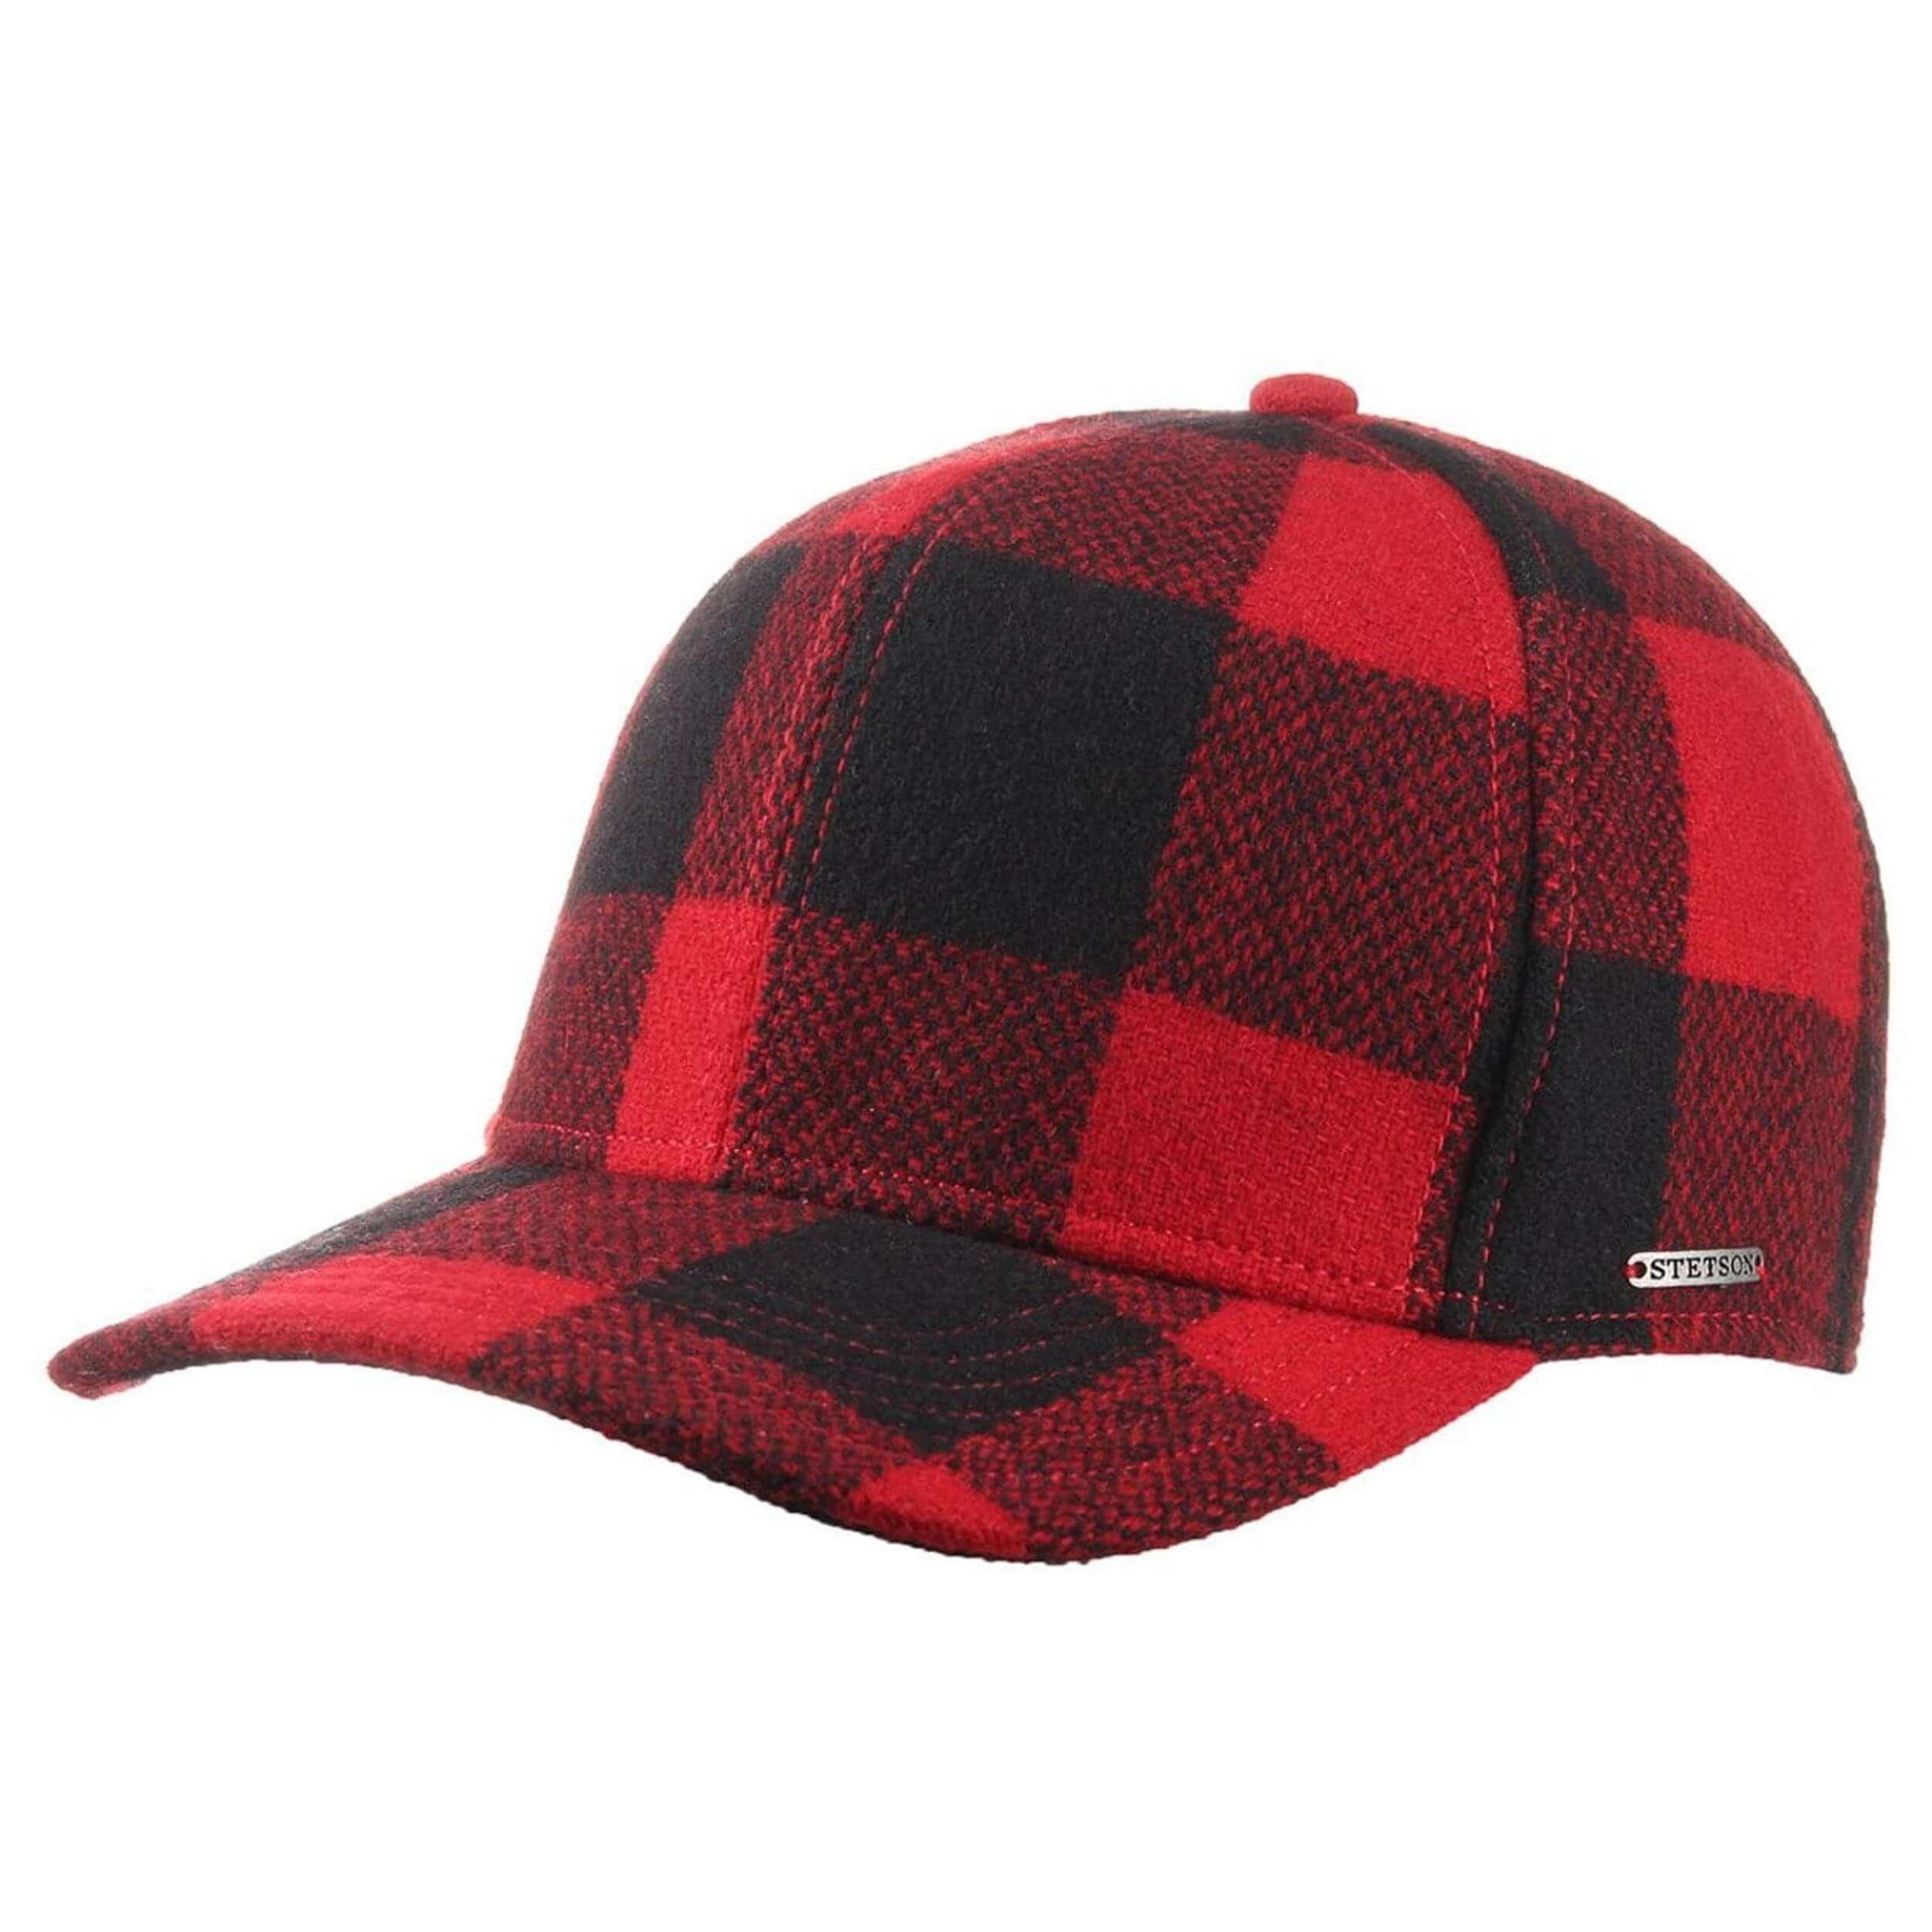 Campbell P.l. Woolrich Cap by Stetson - 49,00